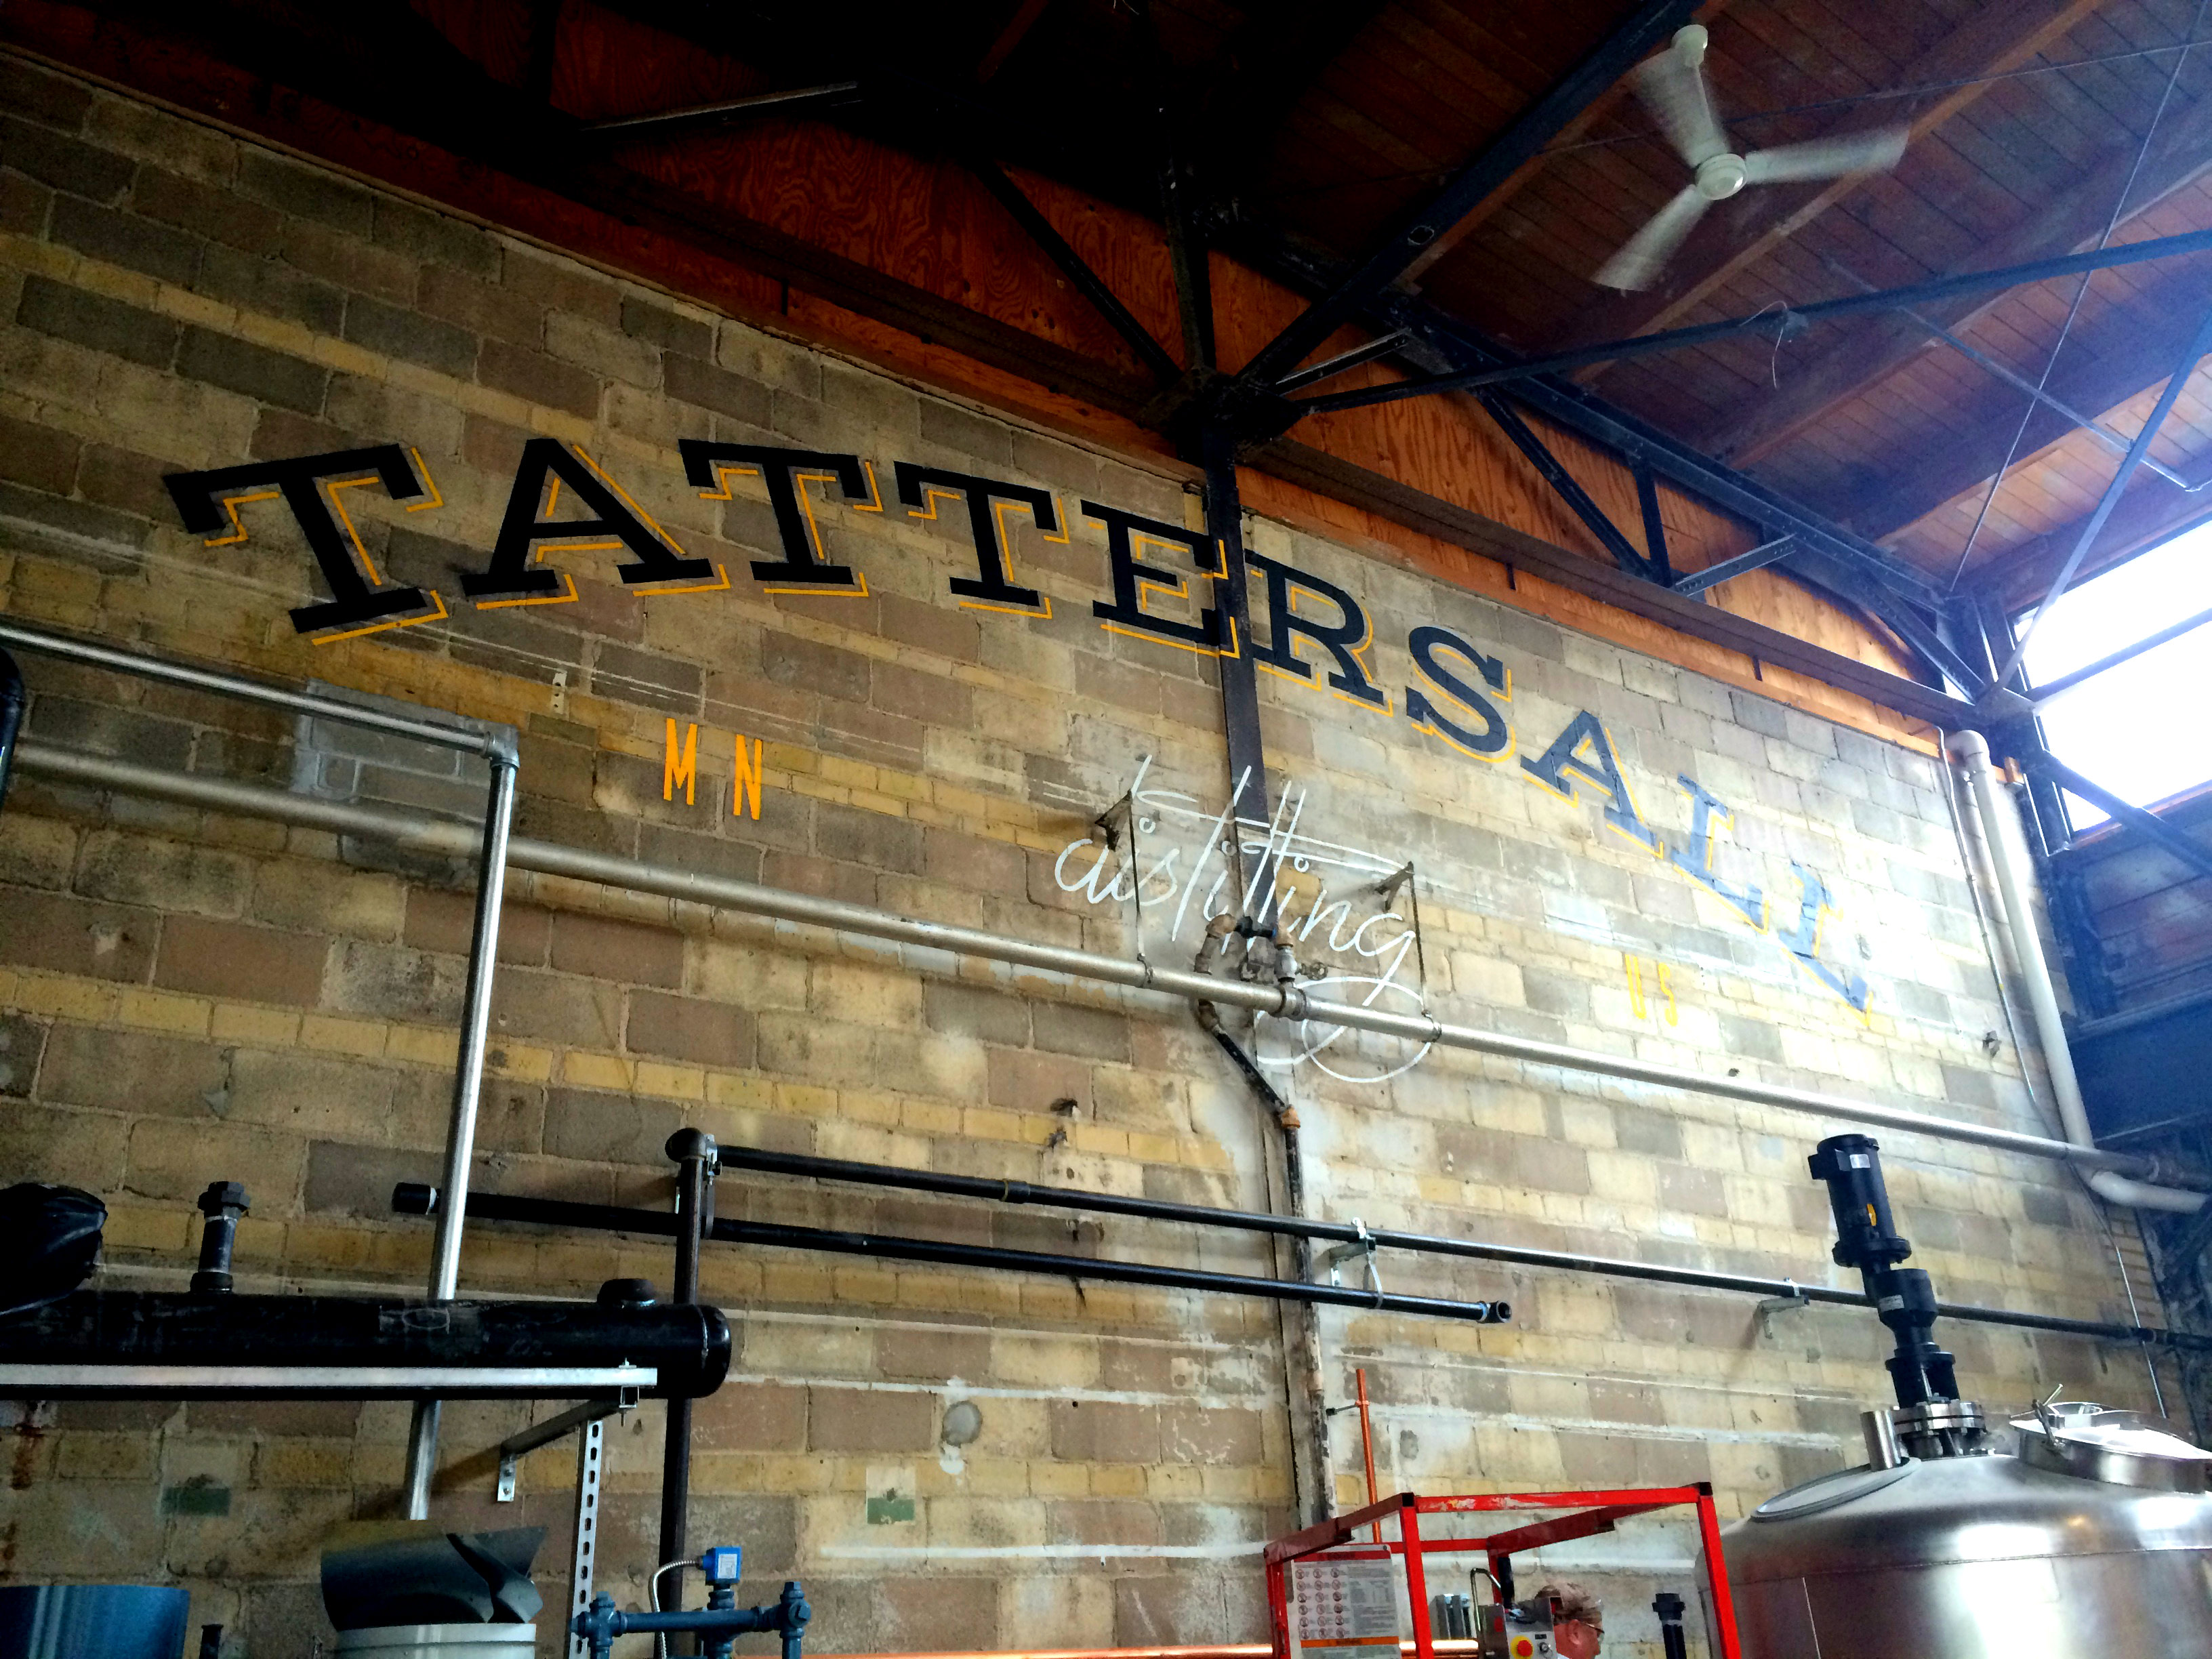 A brick wall with the words “Tattersall Distilling” painted across it.